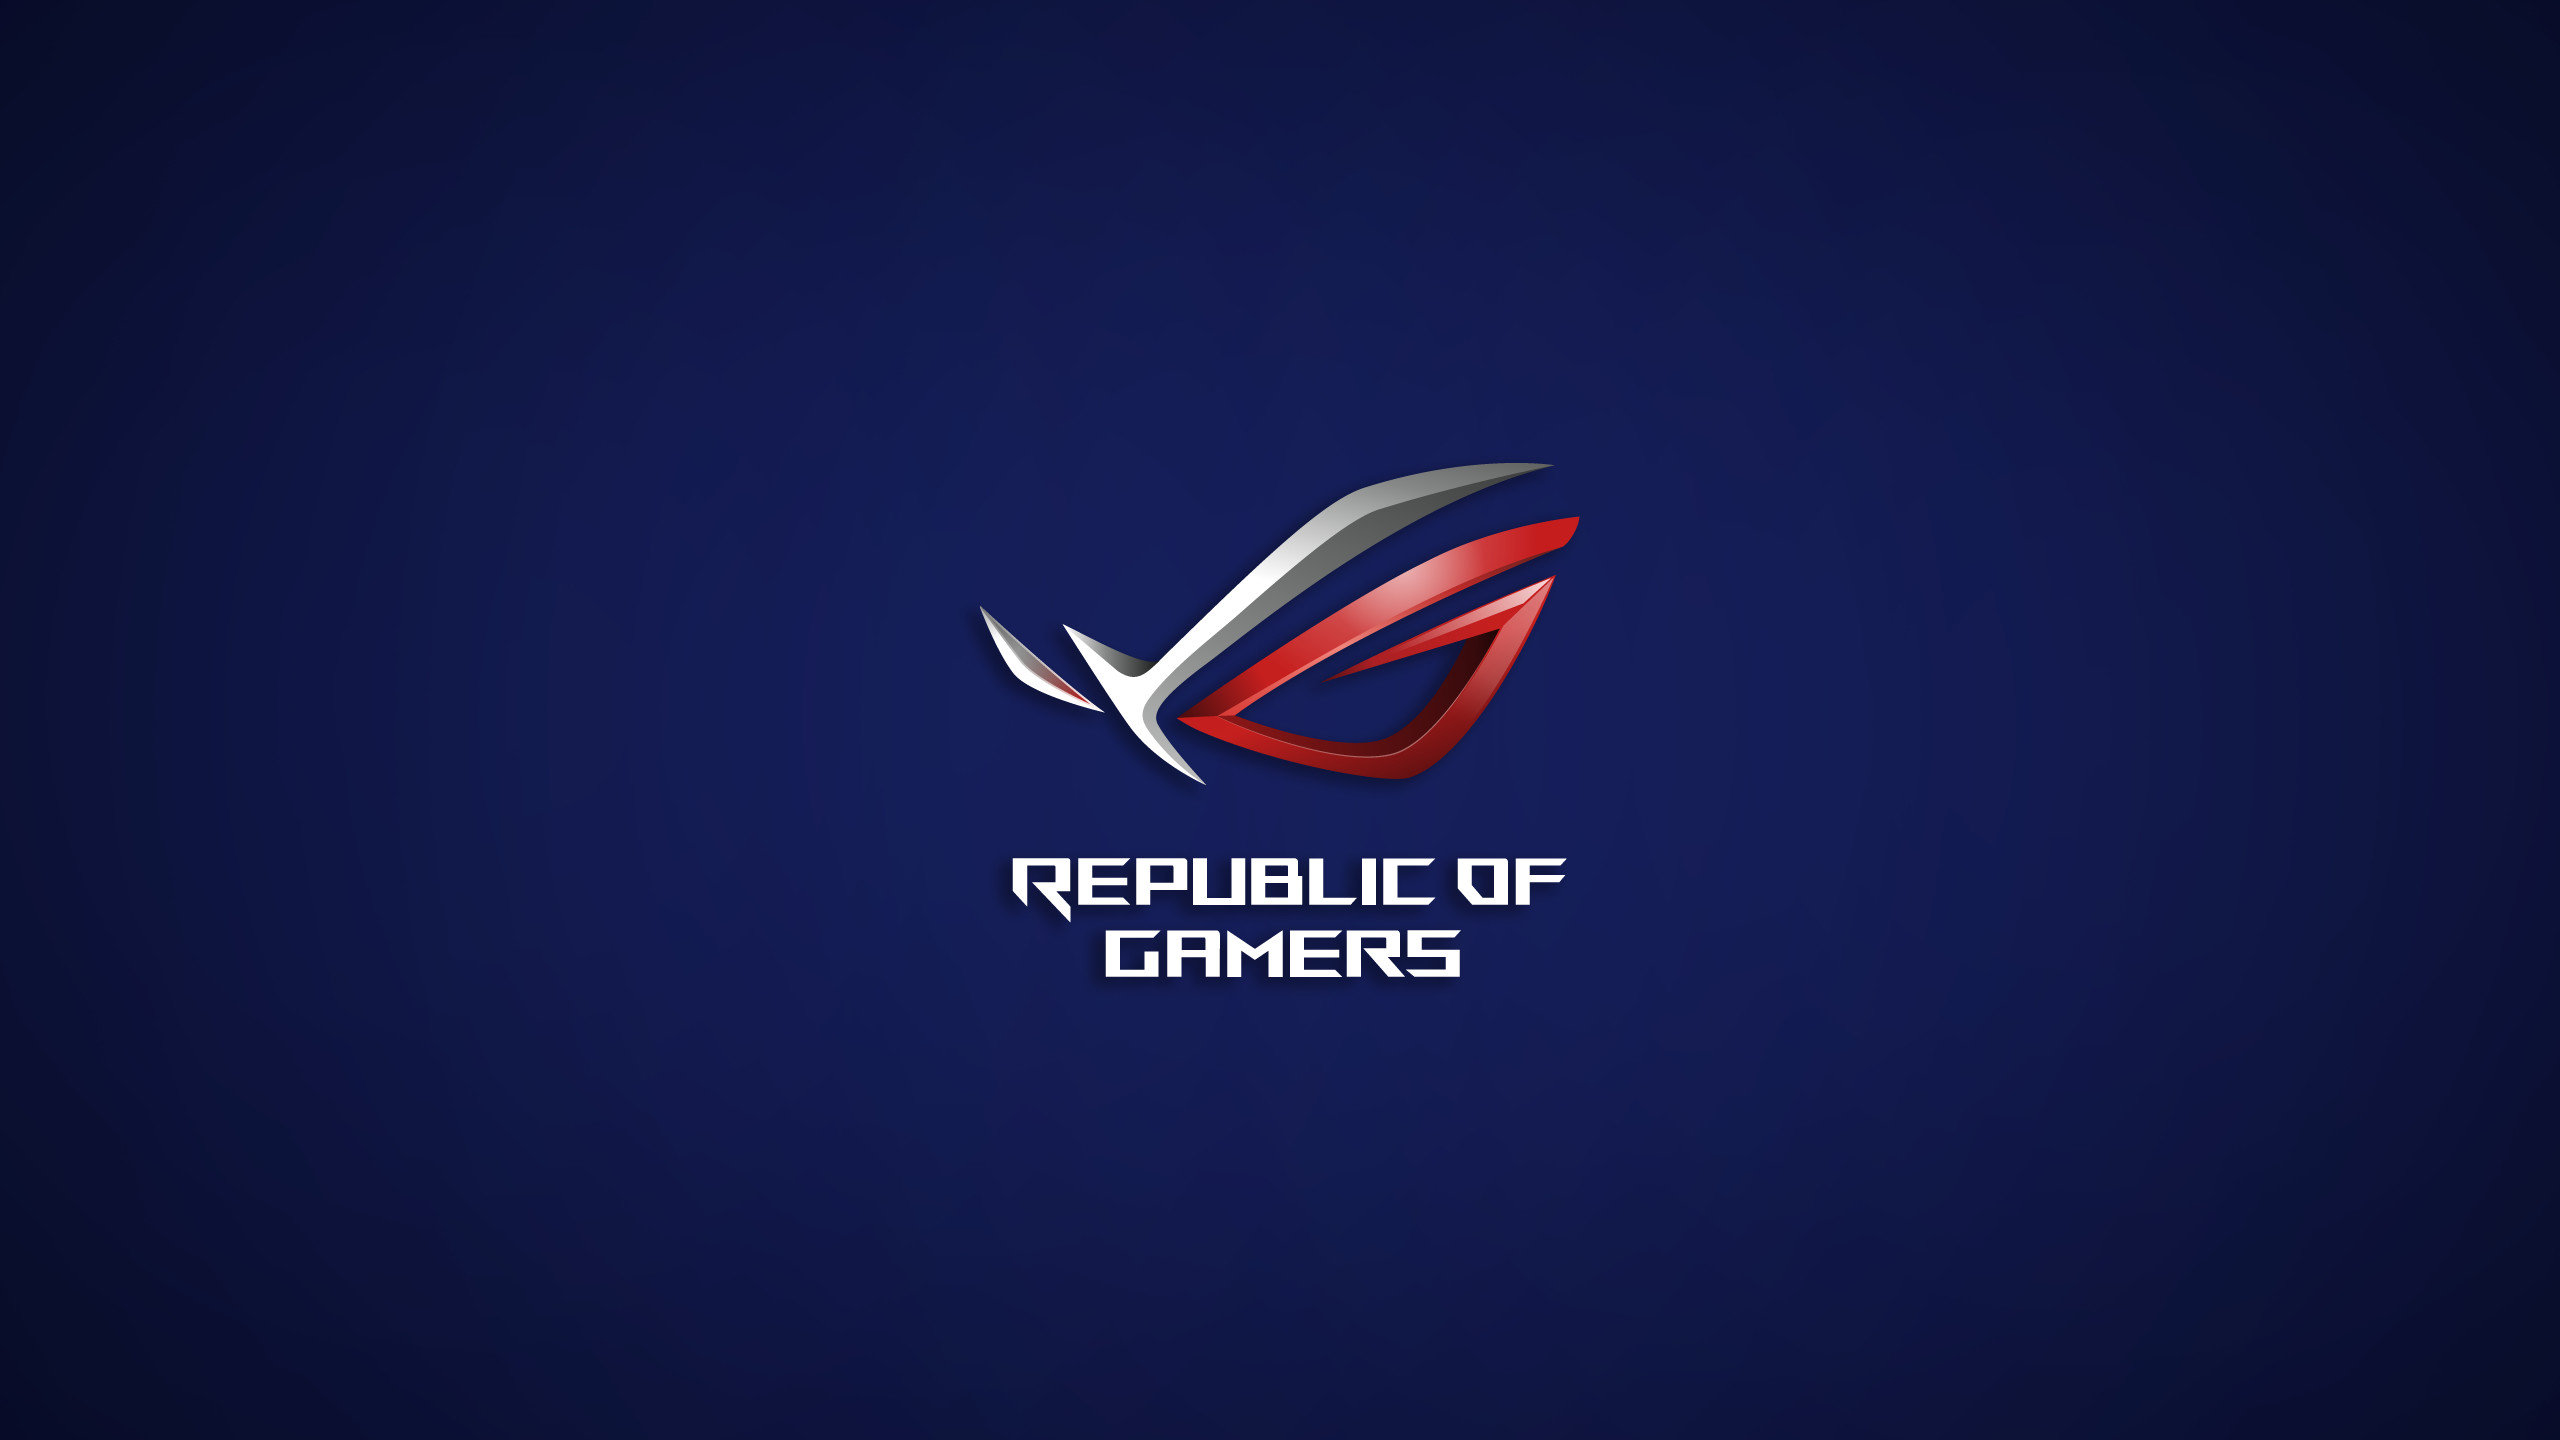 Awesome Republic Of Gamers (ROG) free wallpaper ID:47947 for hd 2560x1440 desktop